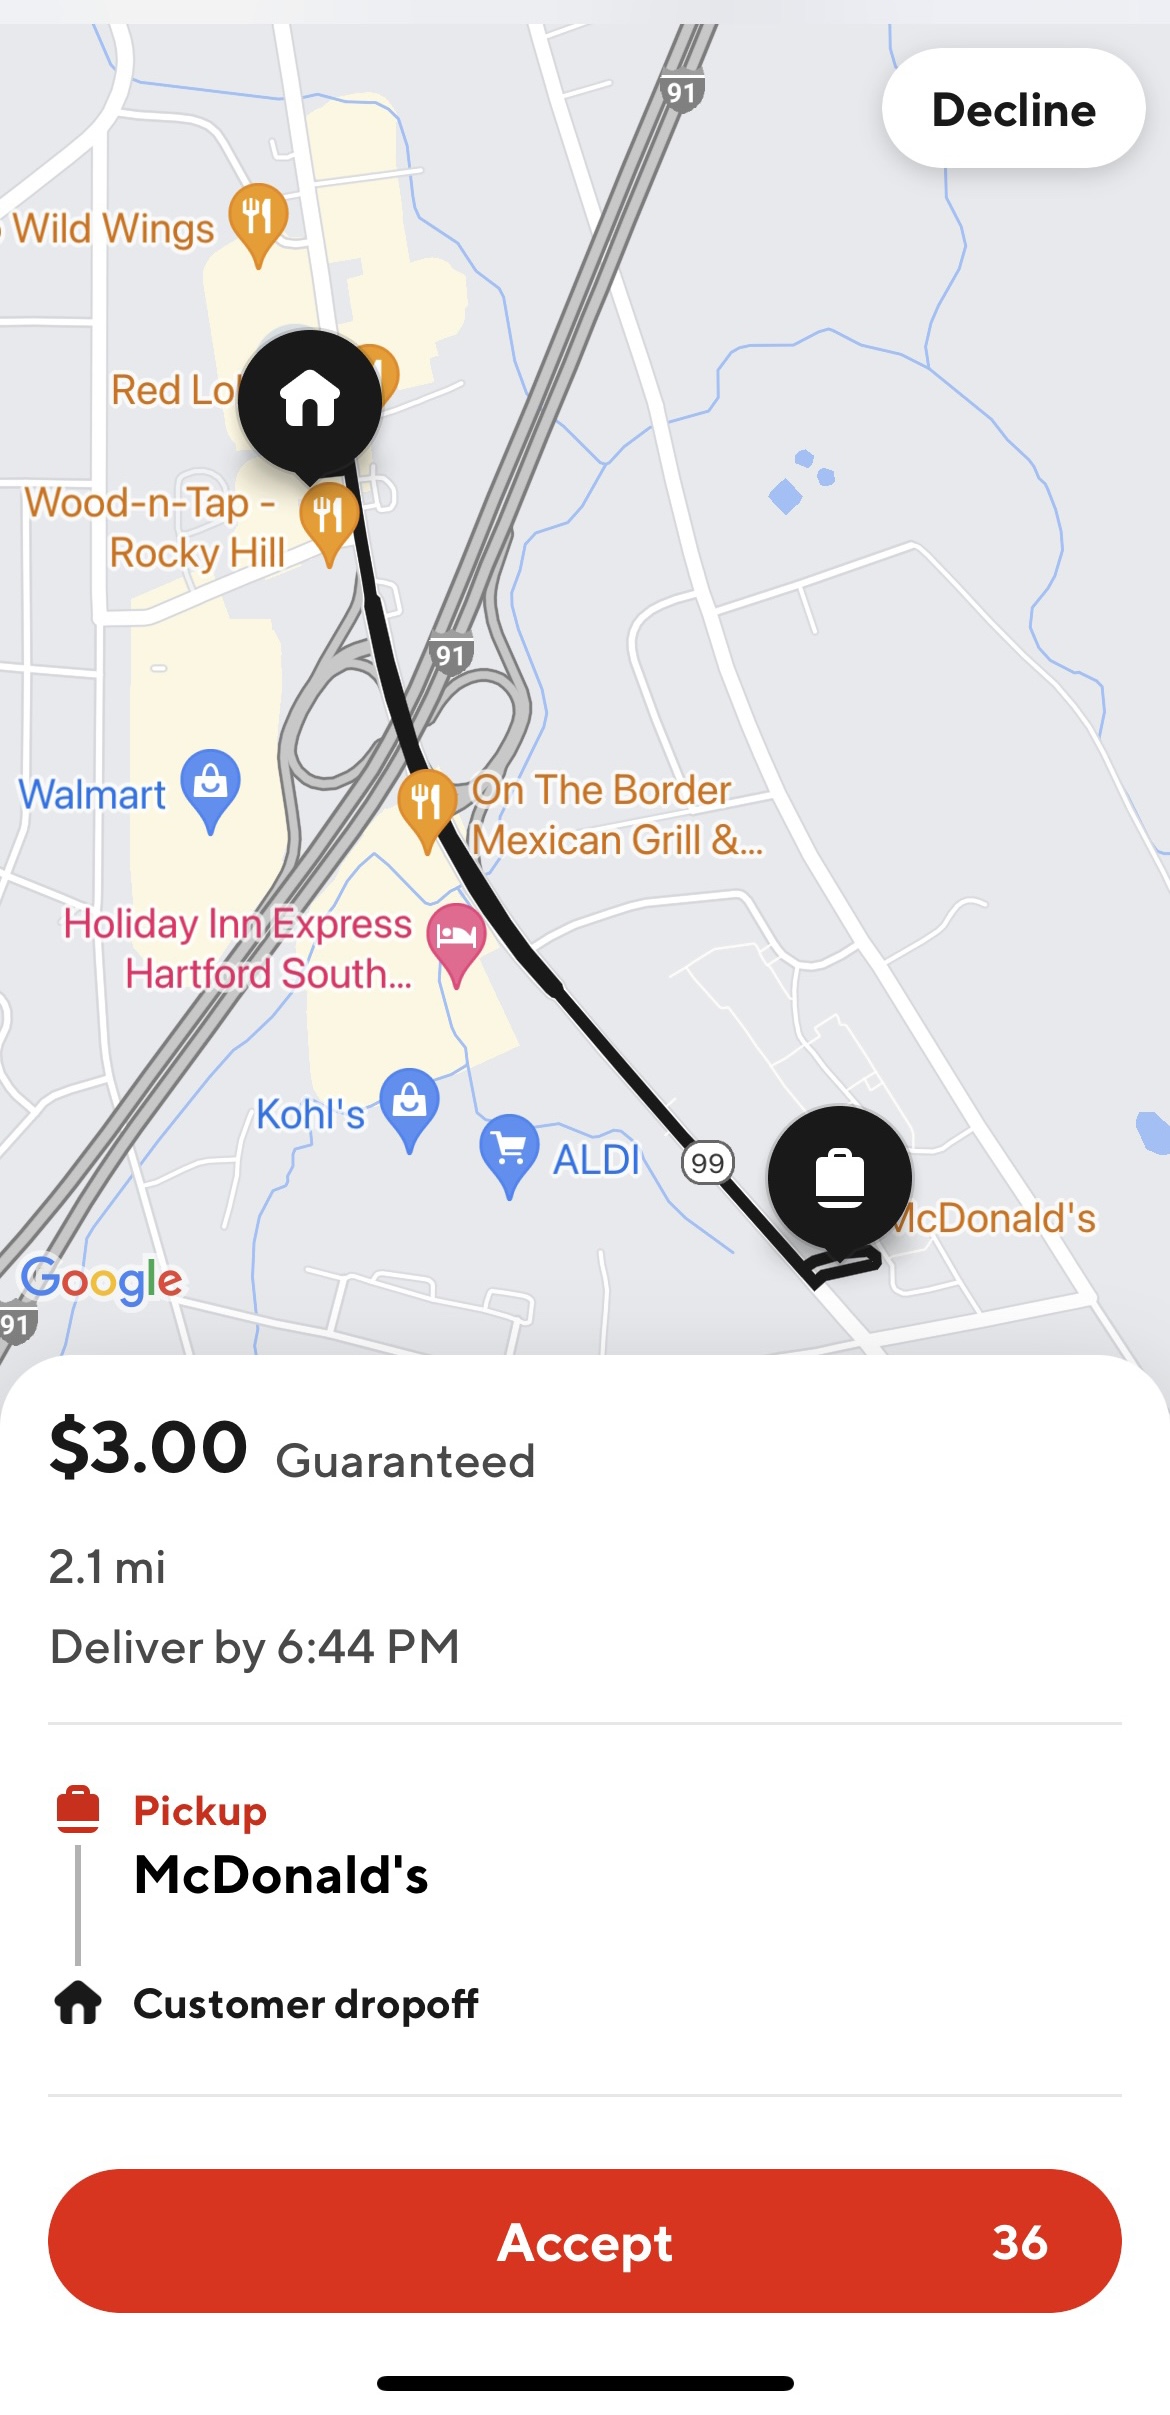 How to Use the Doordash Driver App: Guide & Tutorial For New